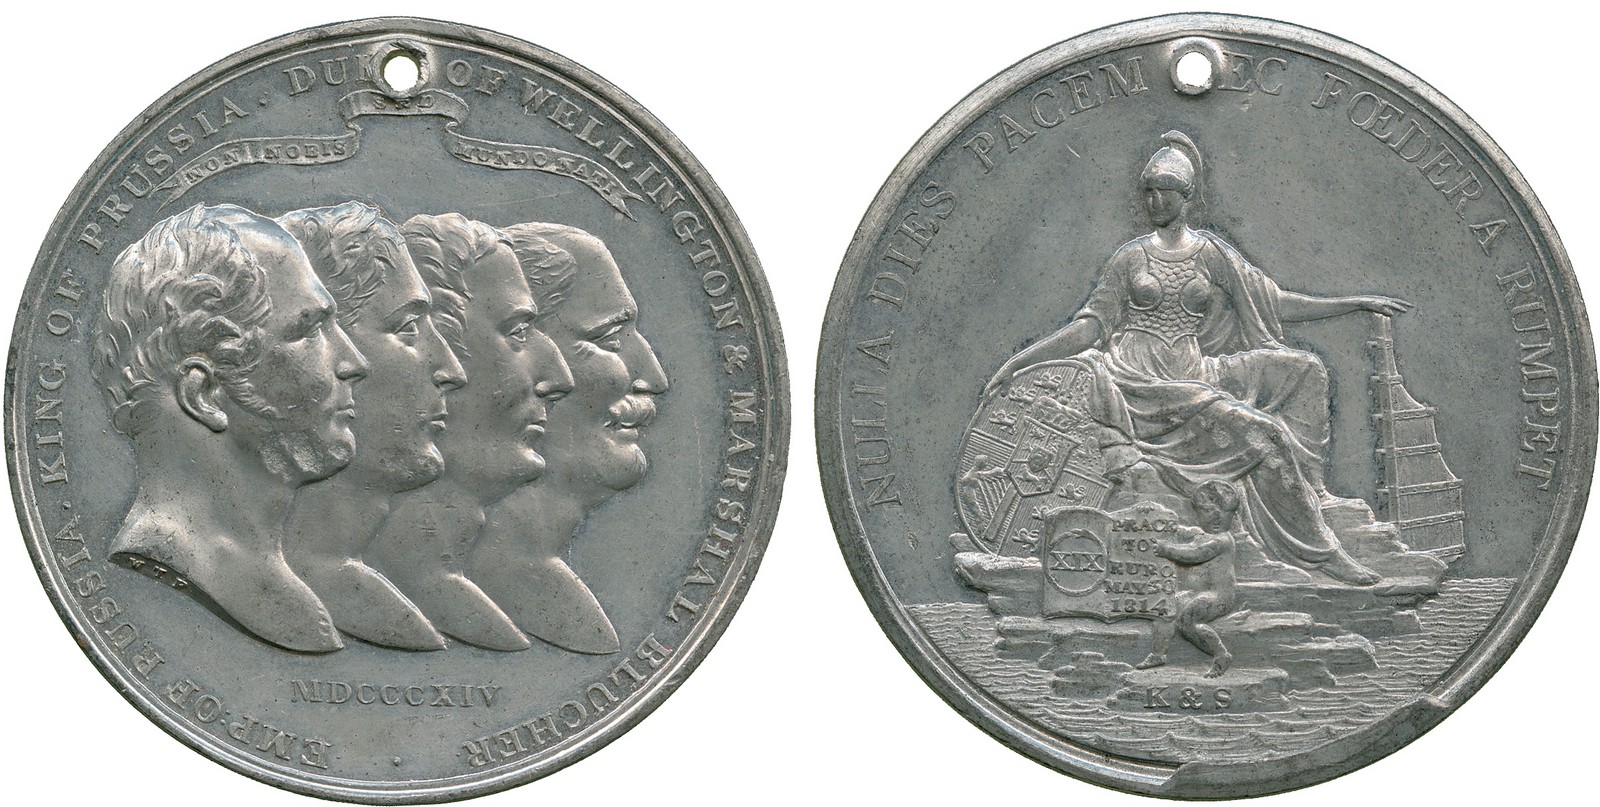 COMMEMORATIVE MEDALS, WORLD MEDALS, Russia, Alexander I, Peace in Europe, White Metal Medal, 1814,